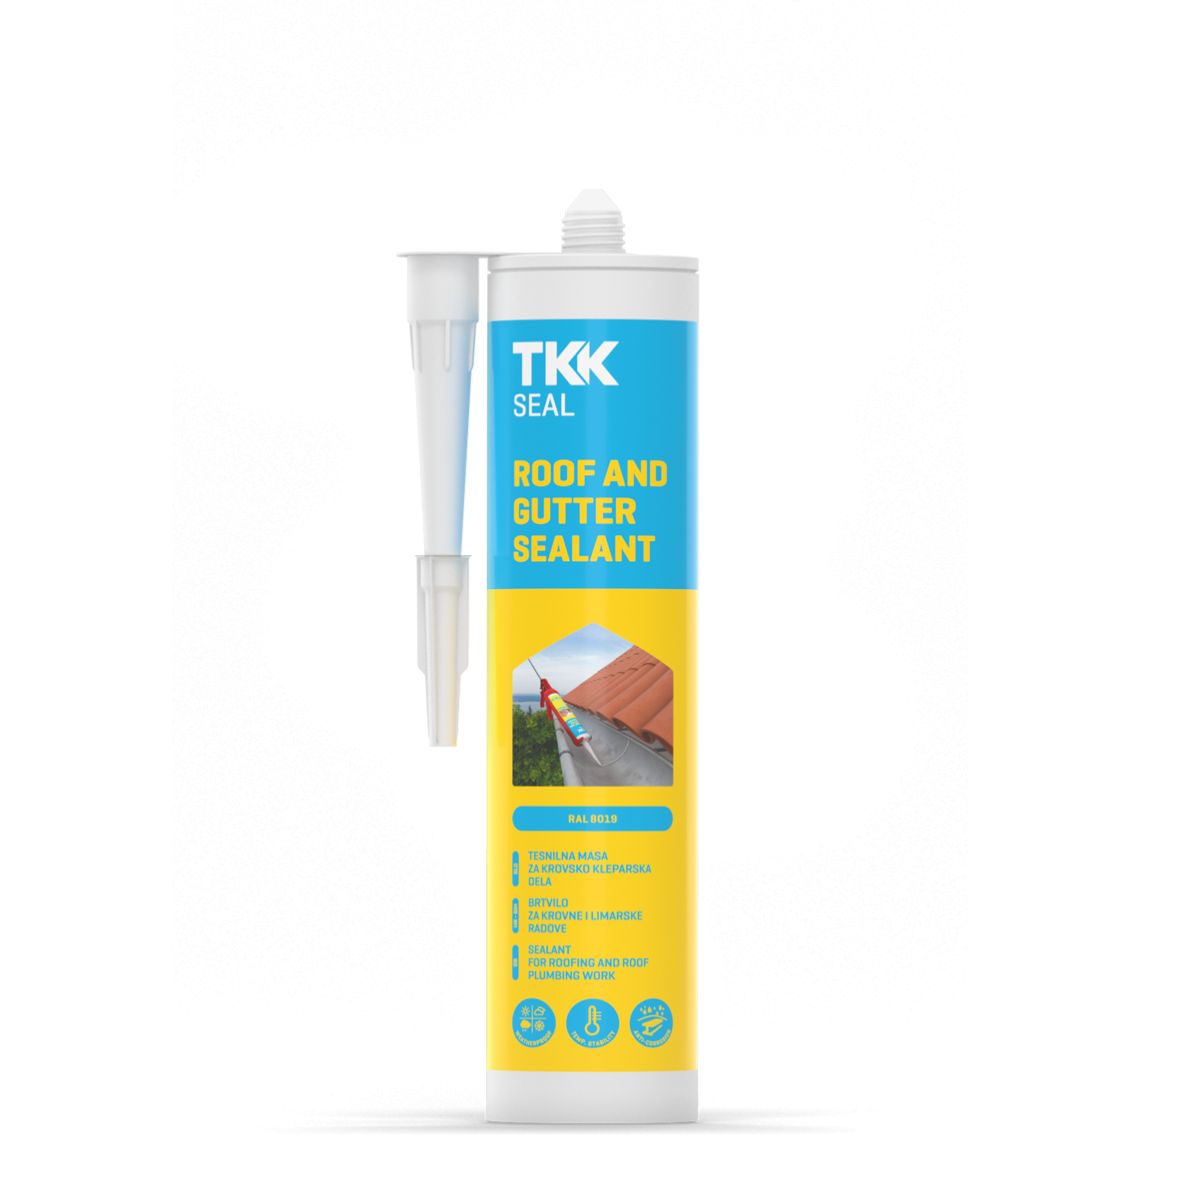 TKK Seal Roof And Gutter Sealant